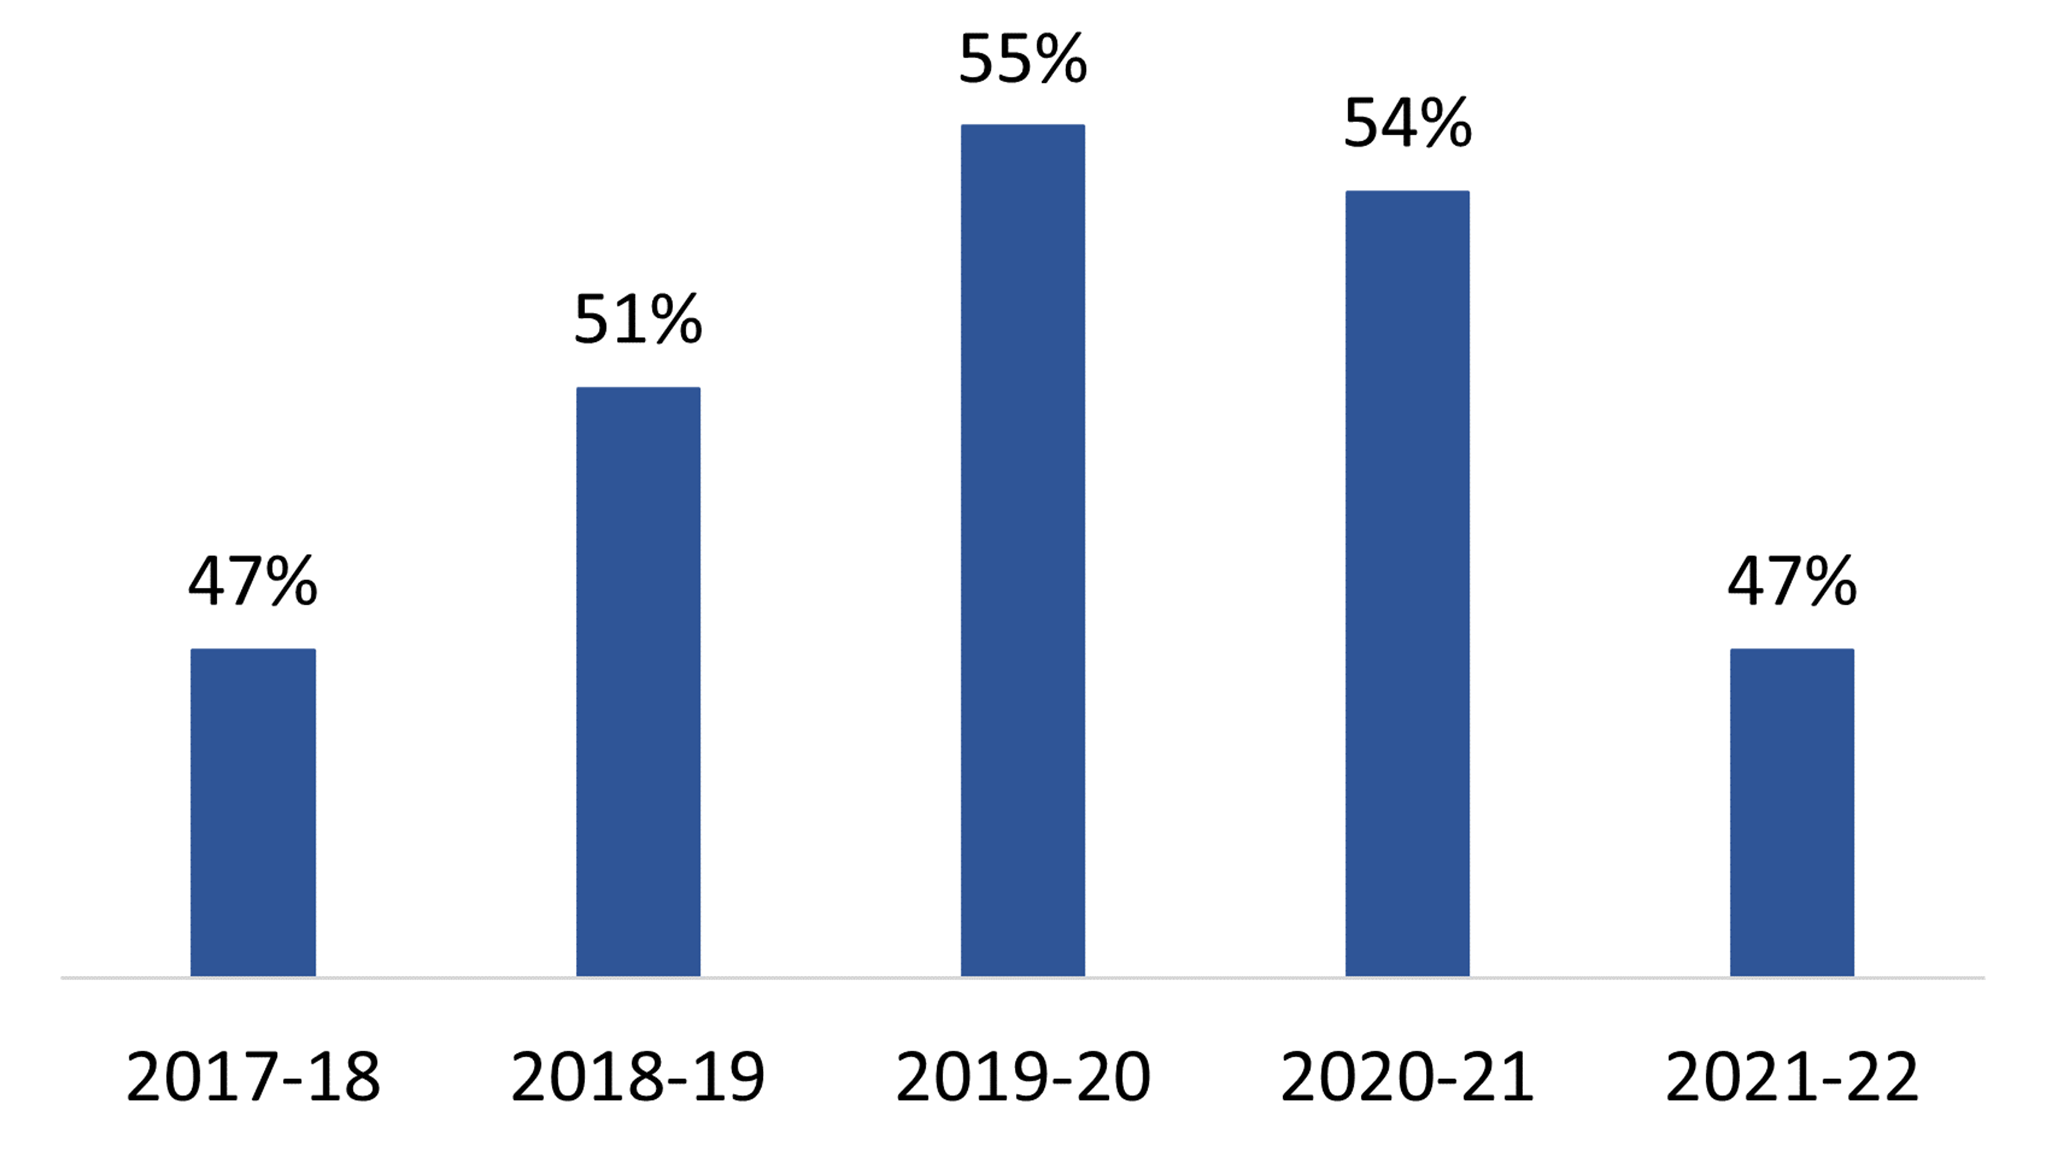 One bar chart showing the percentage of high school students who met the CSU and UC A-G course requirements between the 2017-18 and 2021-22 school years. The 2017-18 percentage was 47%. The 2018-19 percentage was 51%. The 2019-20 percentage was 55%. The 2020-21 percentage was 54%. The 2021-22 percentage was 47%.